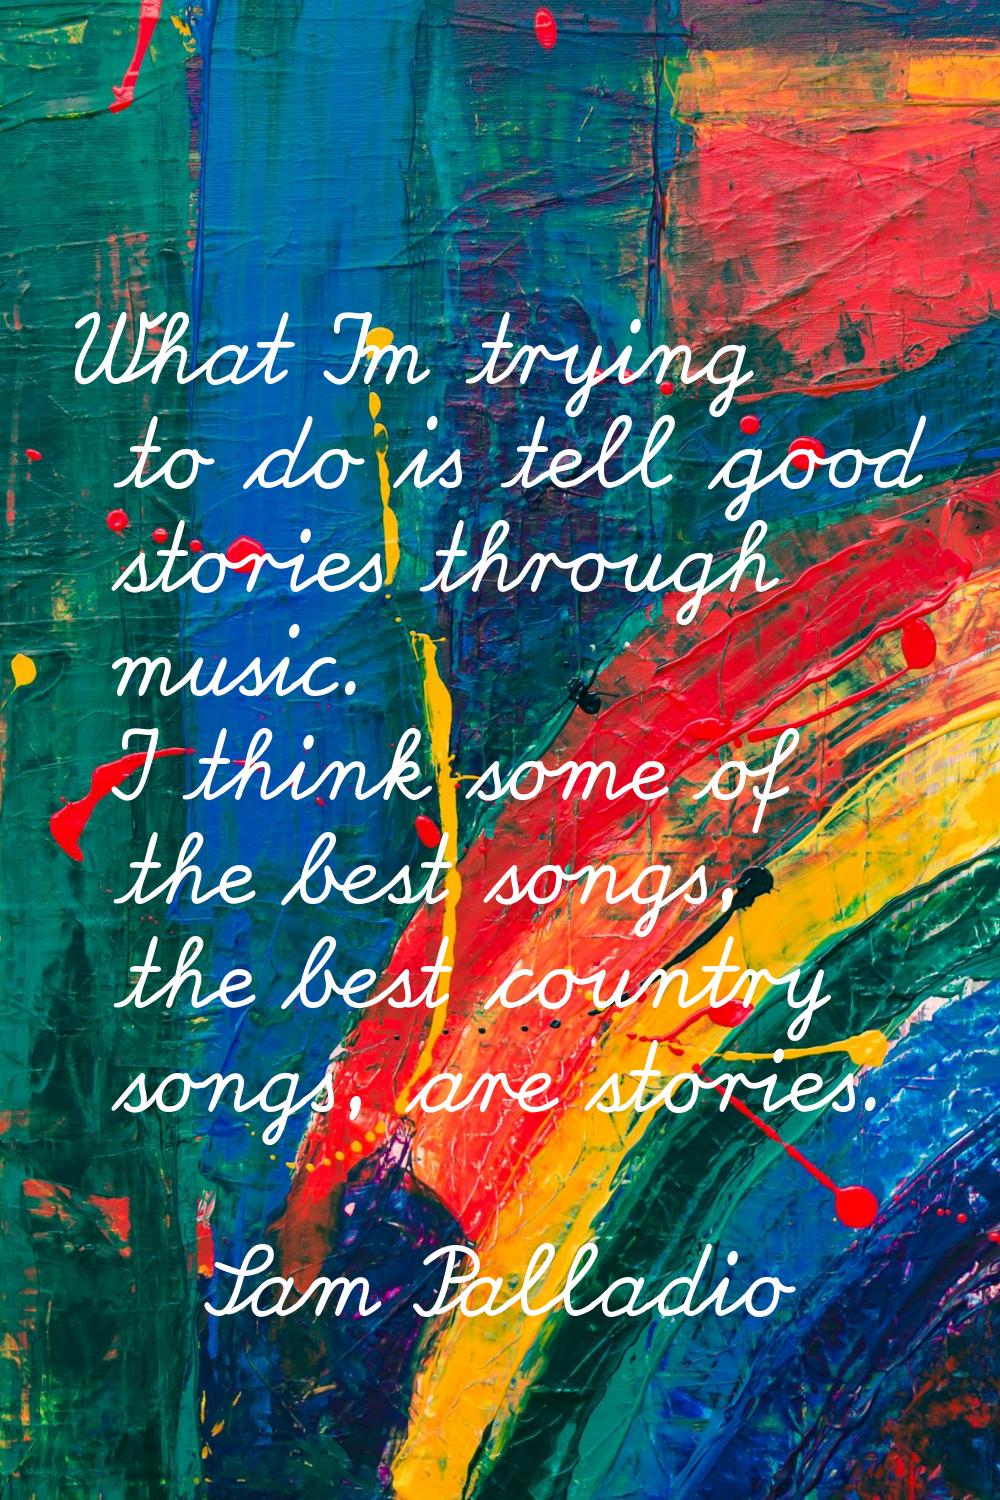 What I'm trying to do is tell good stories through music. I think some of the best songs, the best 